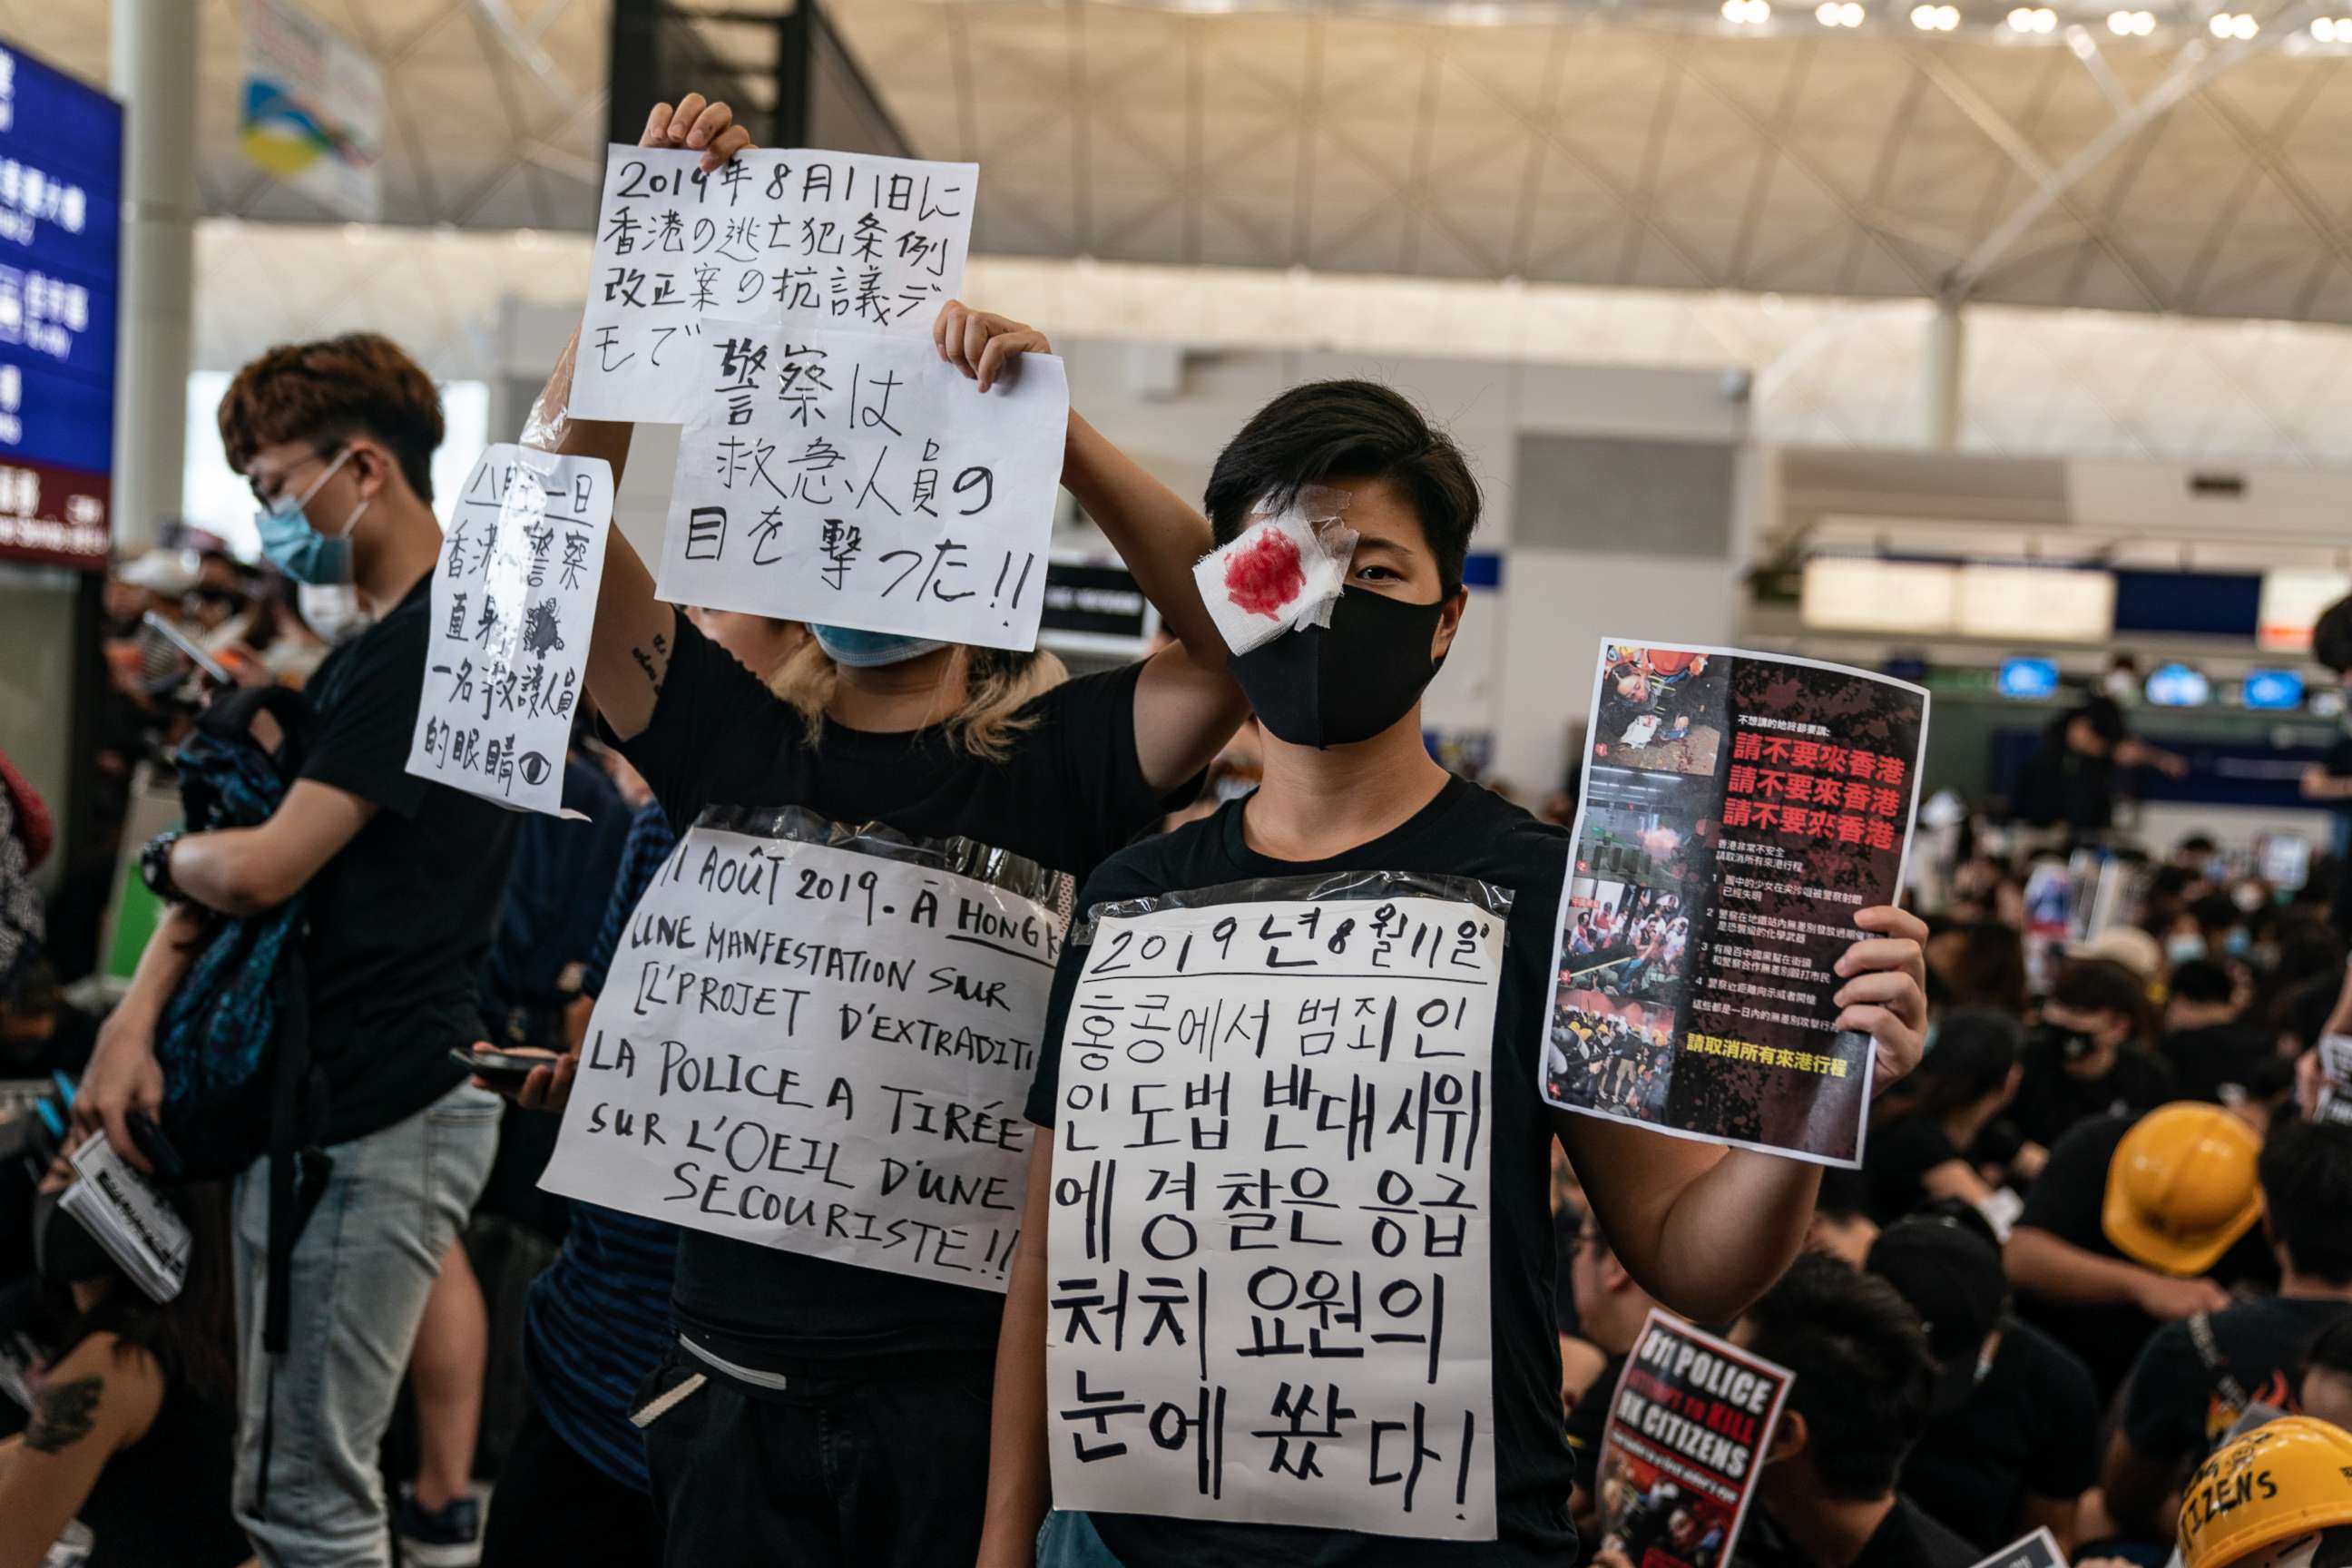 PHOTO: Protesters hold placards as they occupy the arrival hall of the Hong Kong International Airport during a demonstration on Aug. 12, 2019.